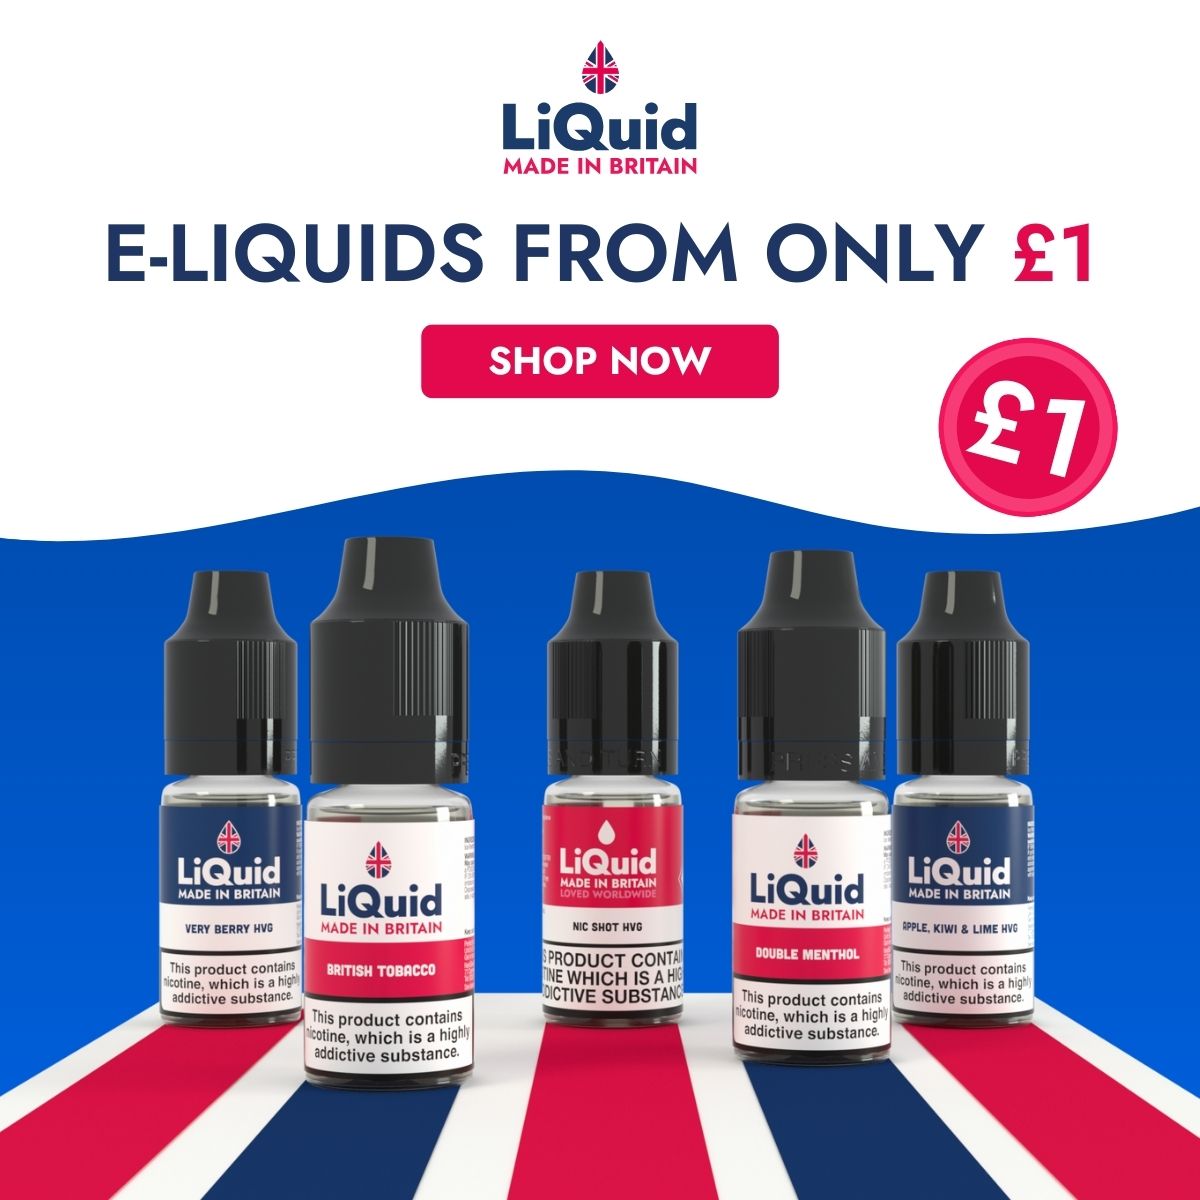 Mobile Hero Page Banner for One Pound e-liquid